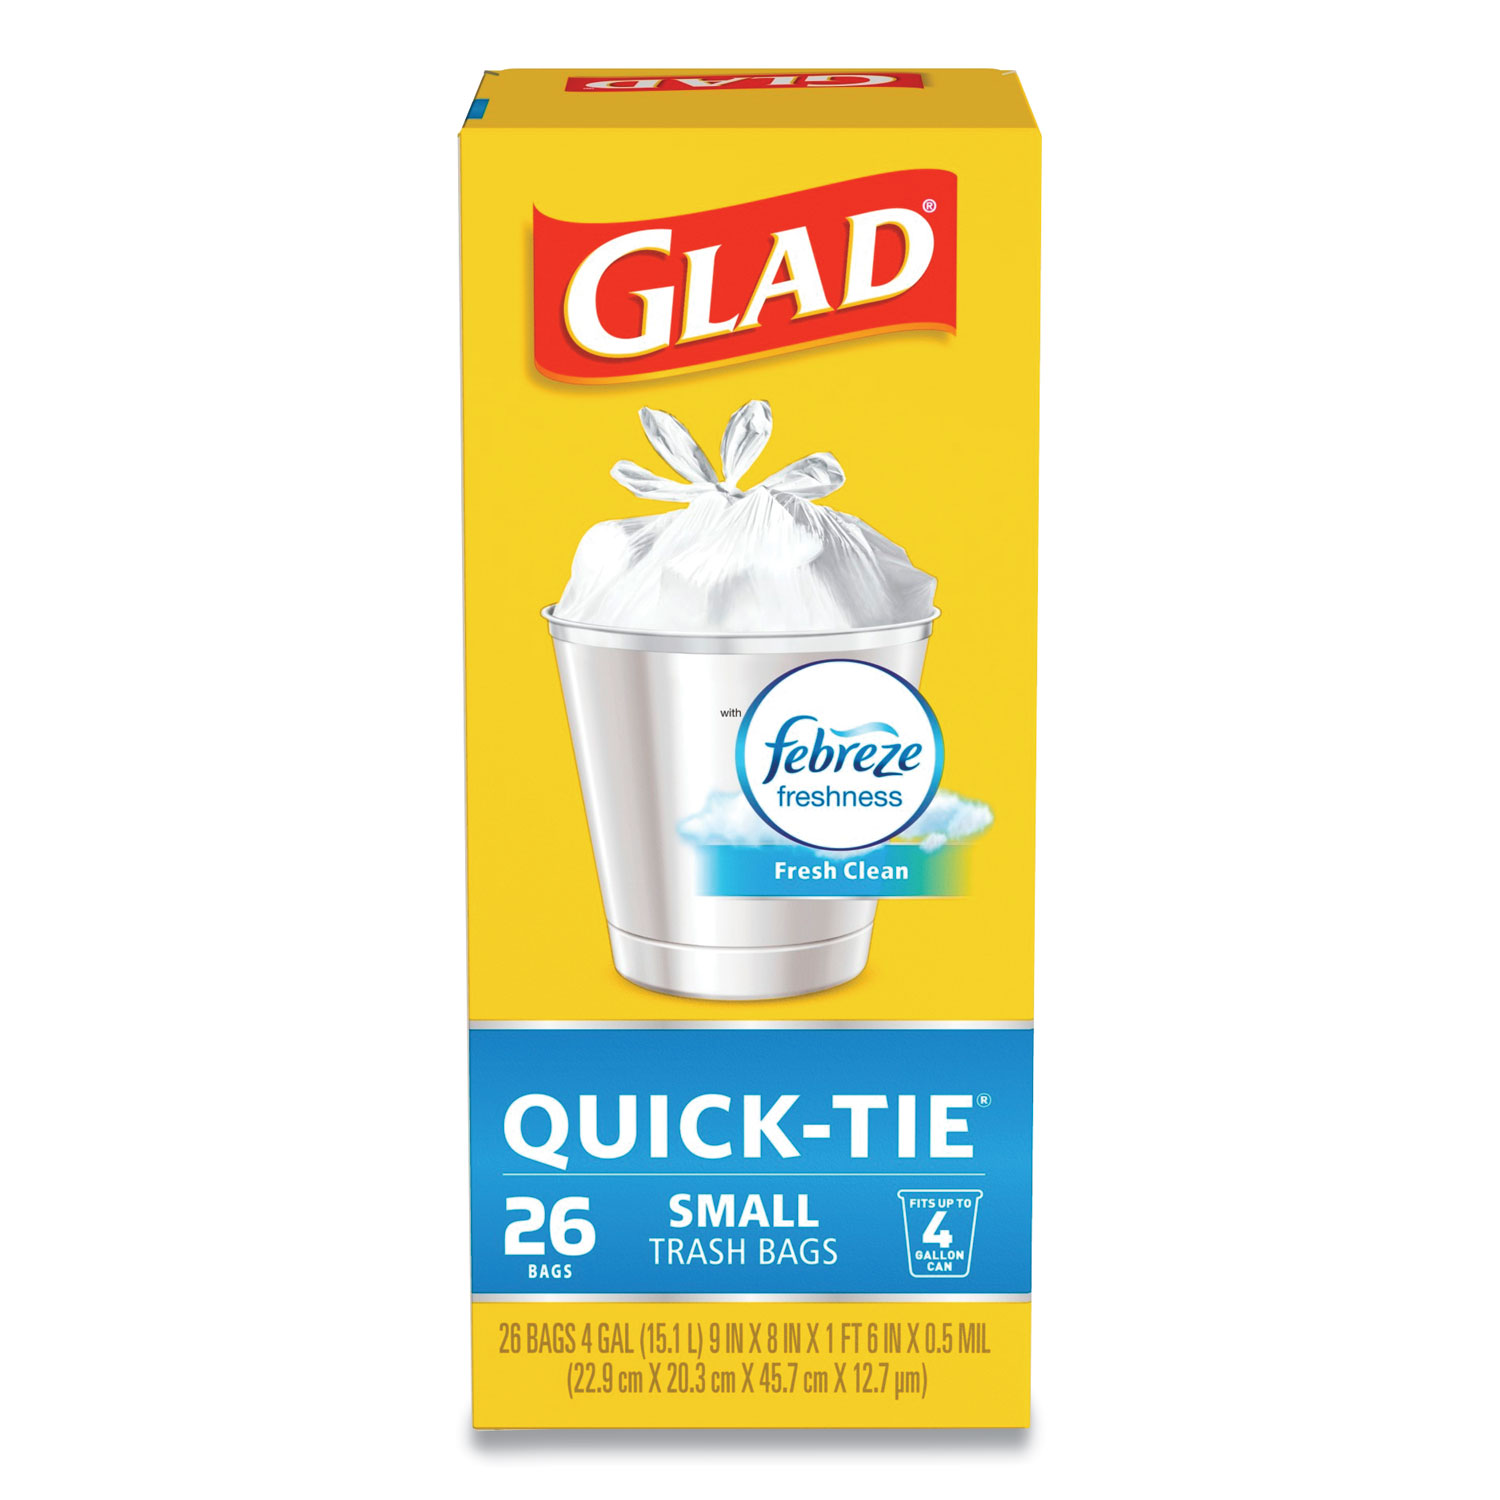 Glad Small Trash Bags - 4 Gallon - 30 Count (Pack of 6)